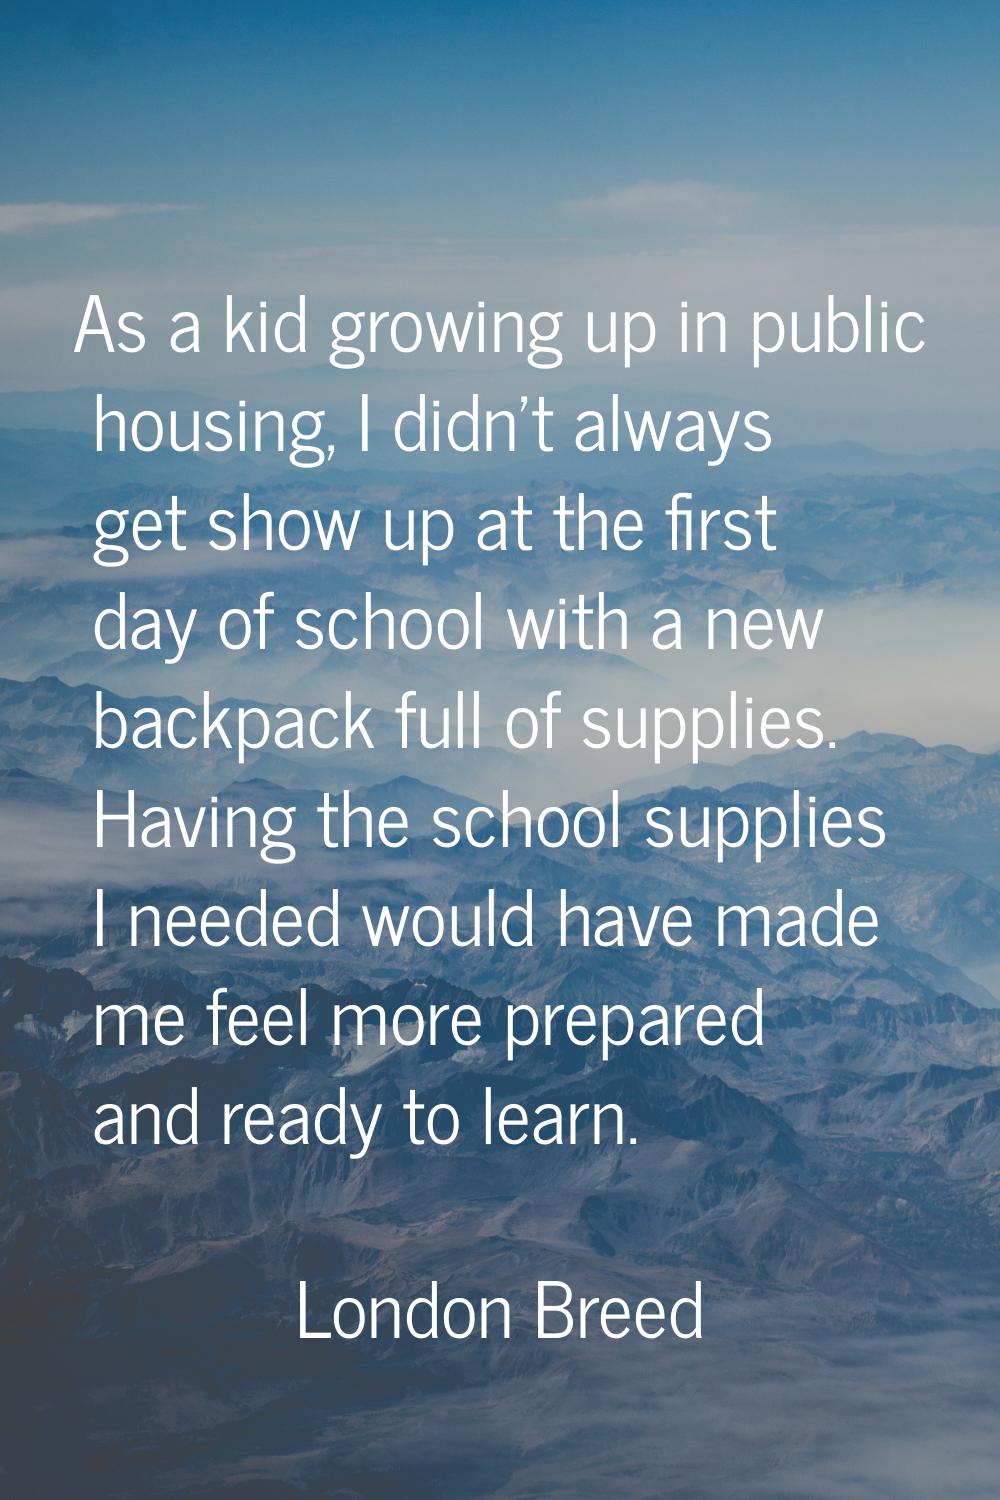 As a kid growing up in public housing, I didn't always get show up at the first day of school with 